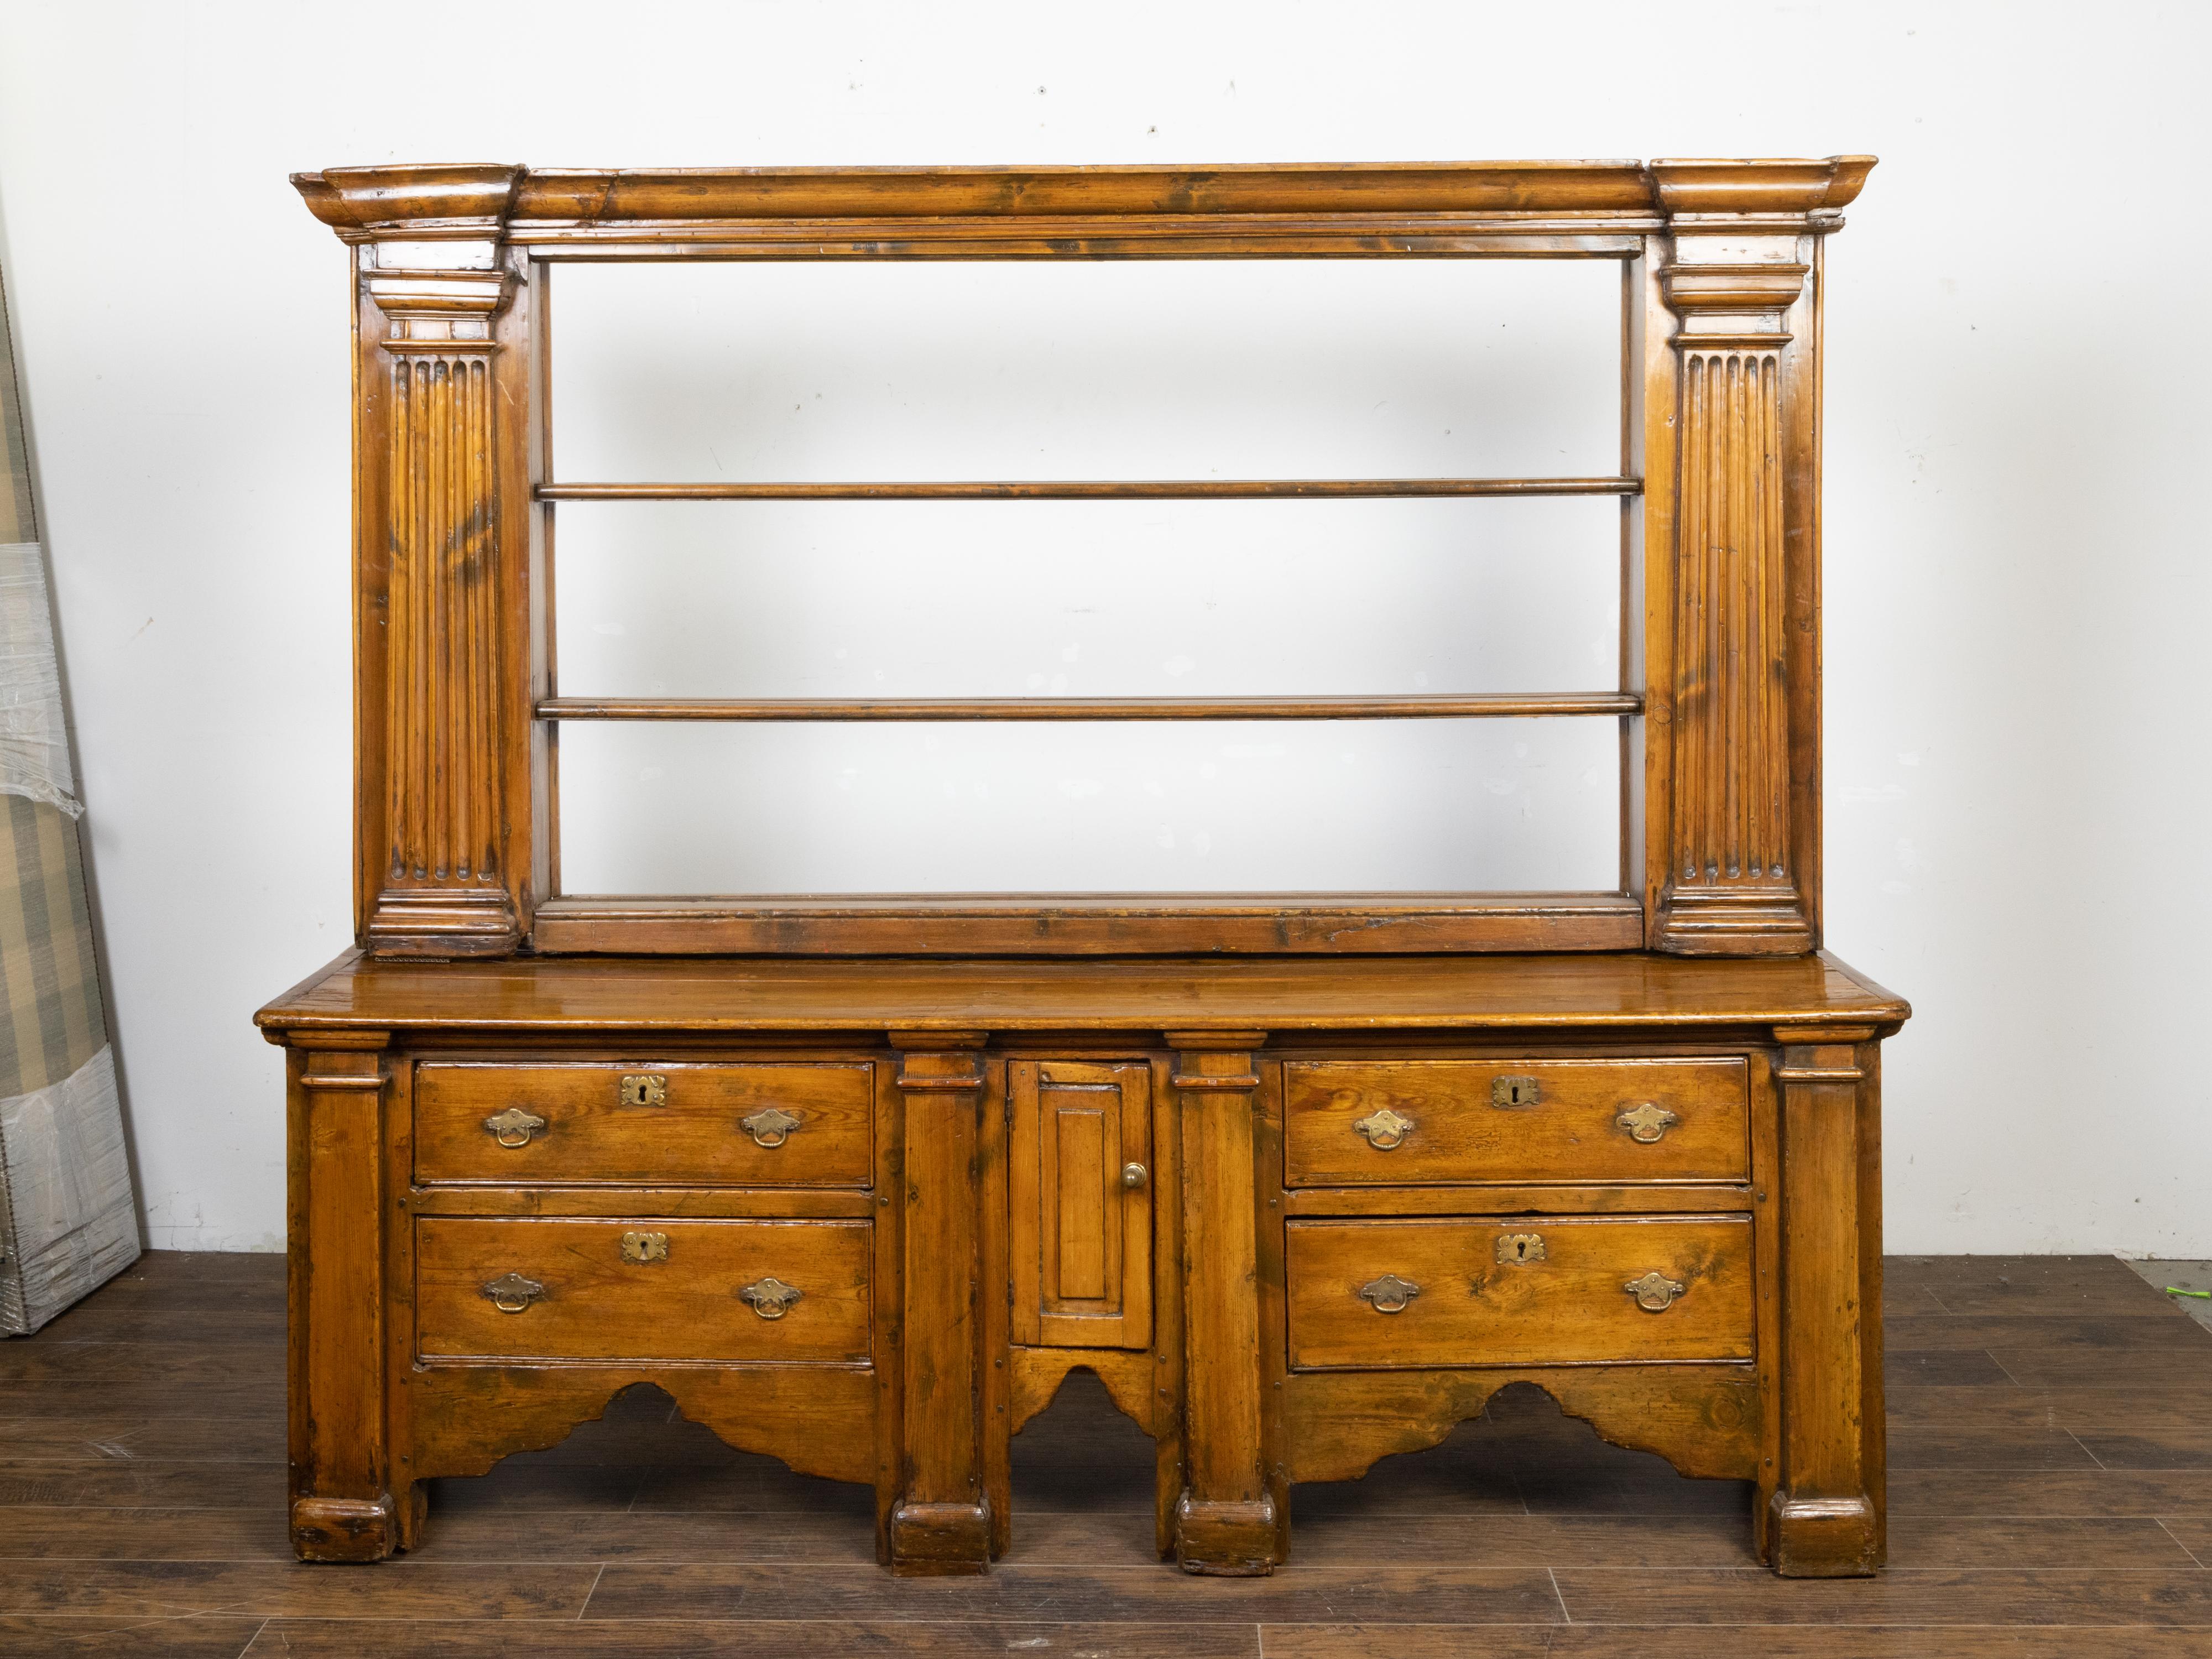 An English Georgian period pine dresser from the early 19th century, with open shelves, Doric style pilasters, petite door and four drawers. Created in England during the Georgian period in the early years of the 19th century, this elegant pine